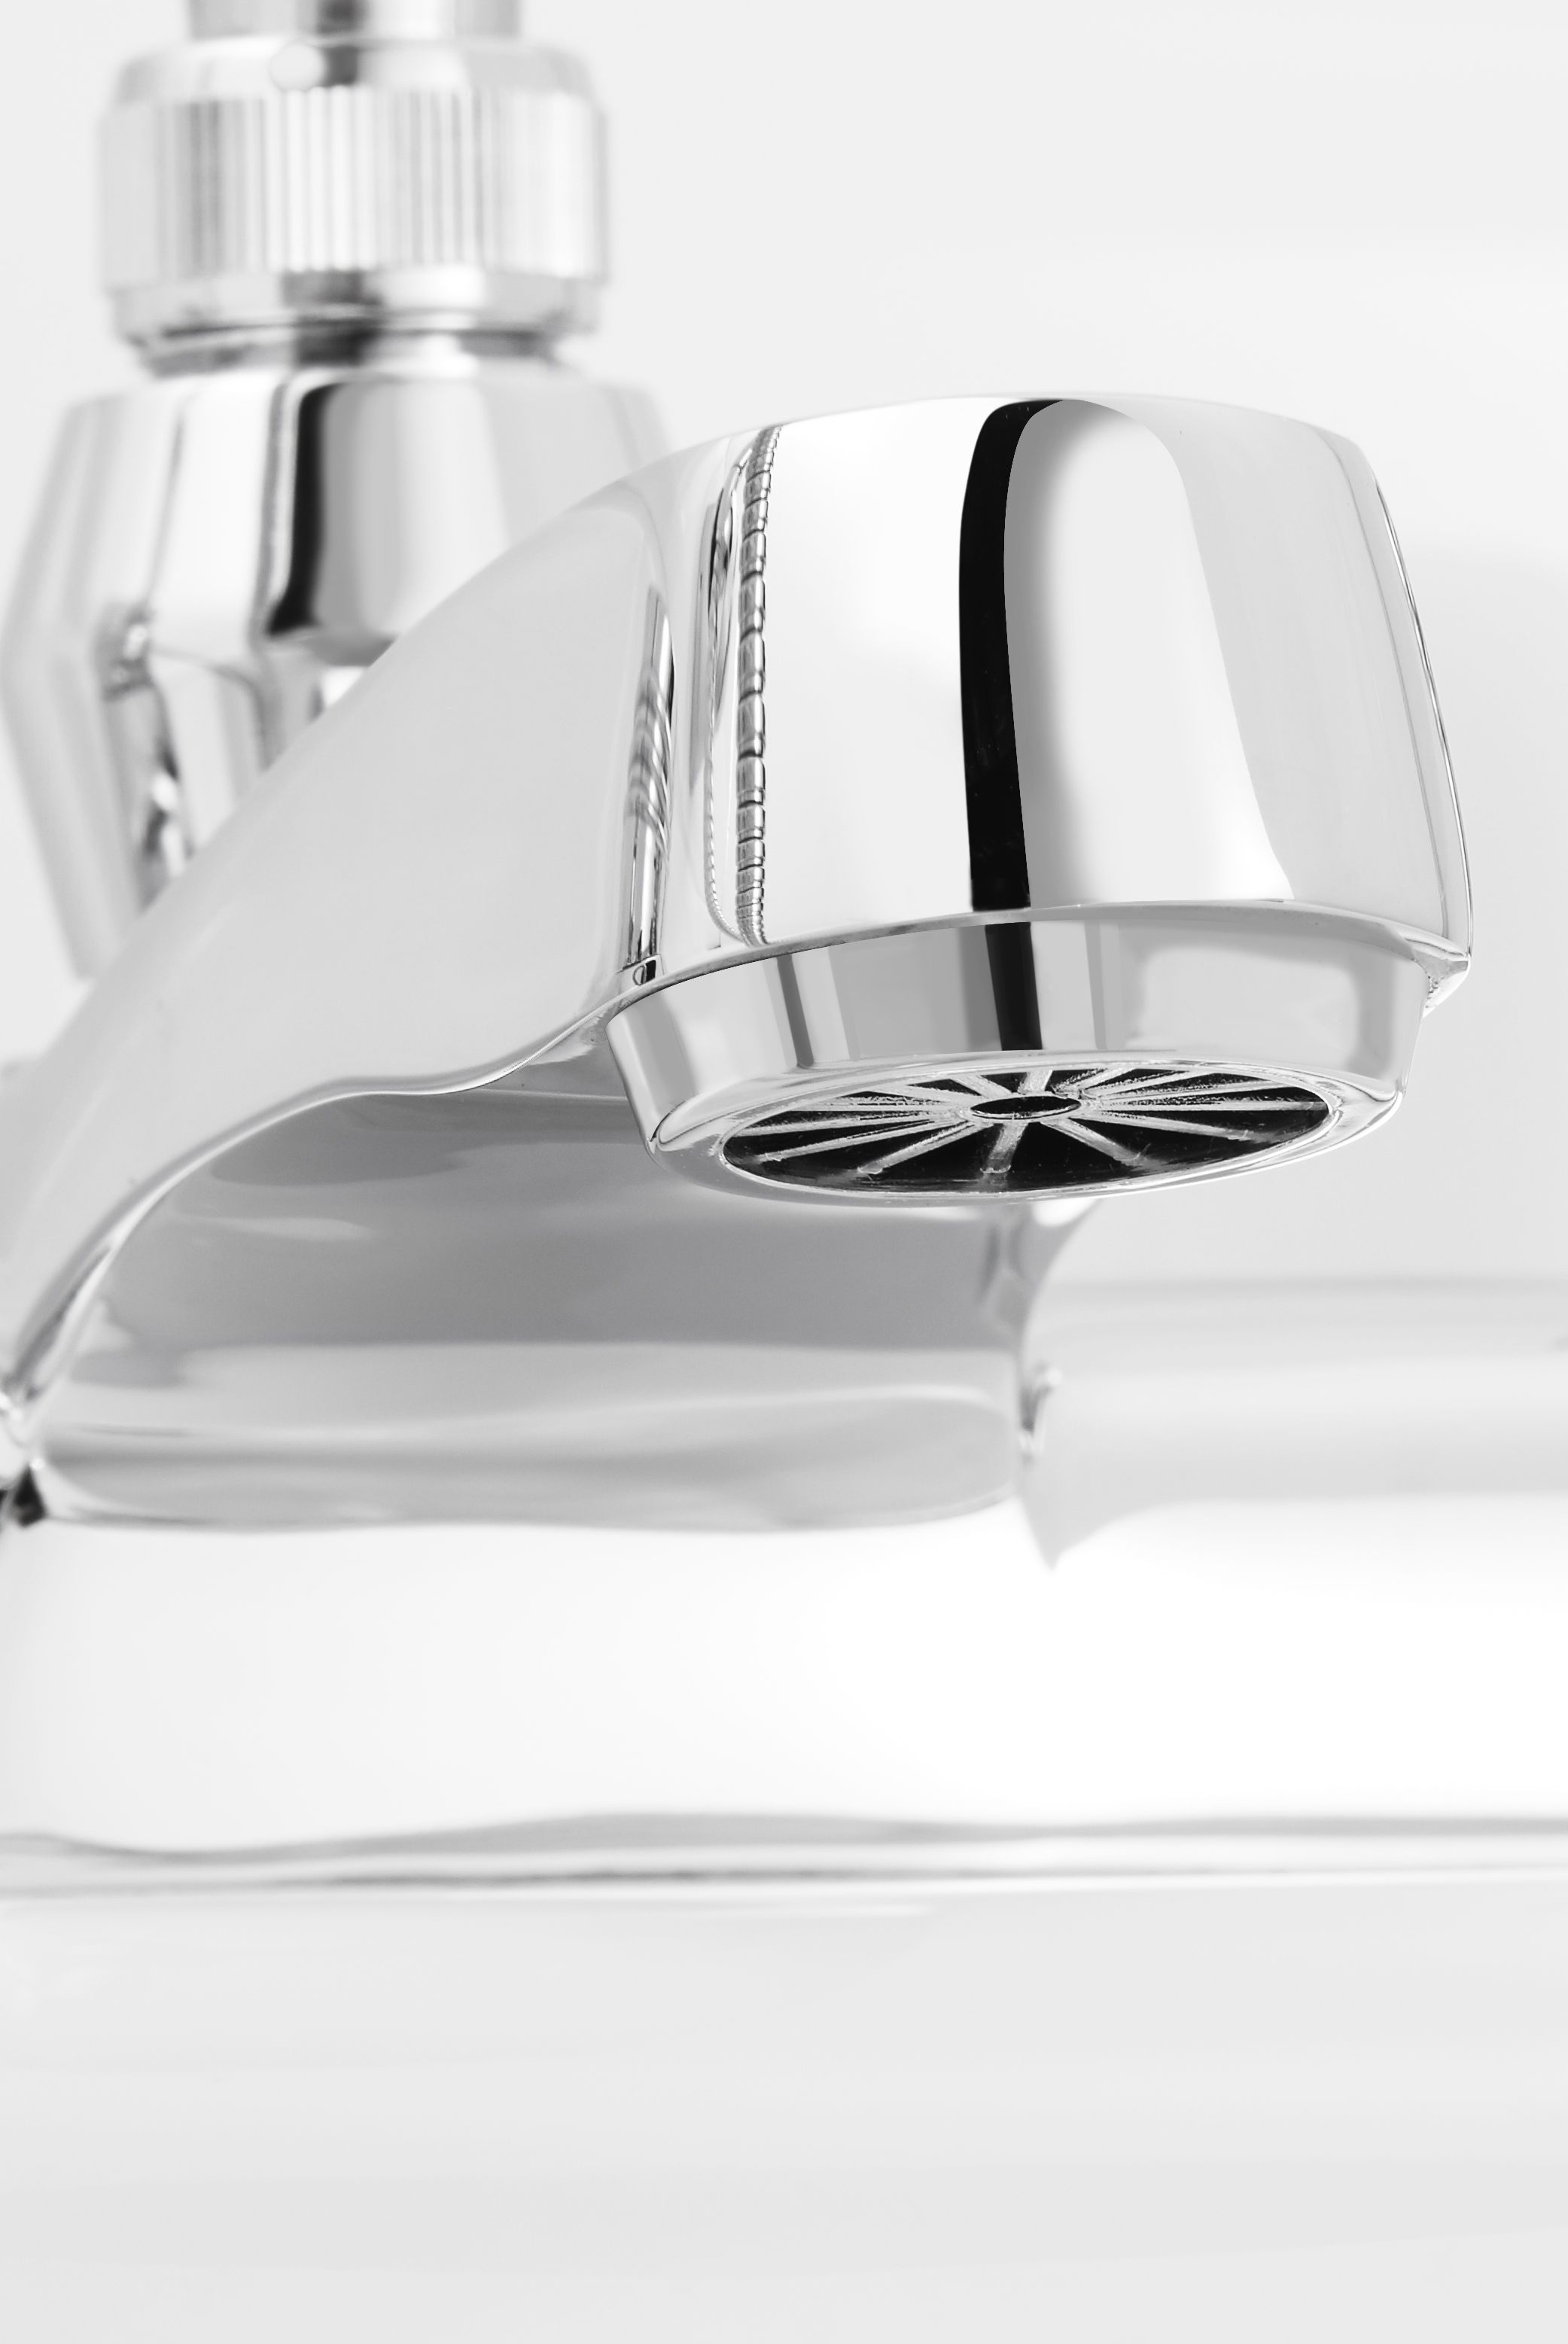 GoodHome Annagh Combi boiler, gravity-fed & mains pressure water systems Ceramic Shower mixer Tap